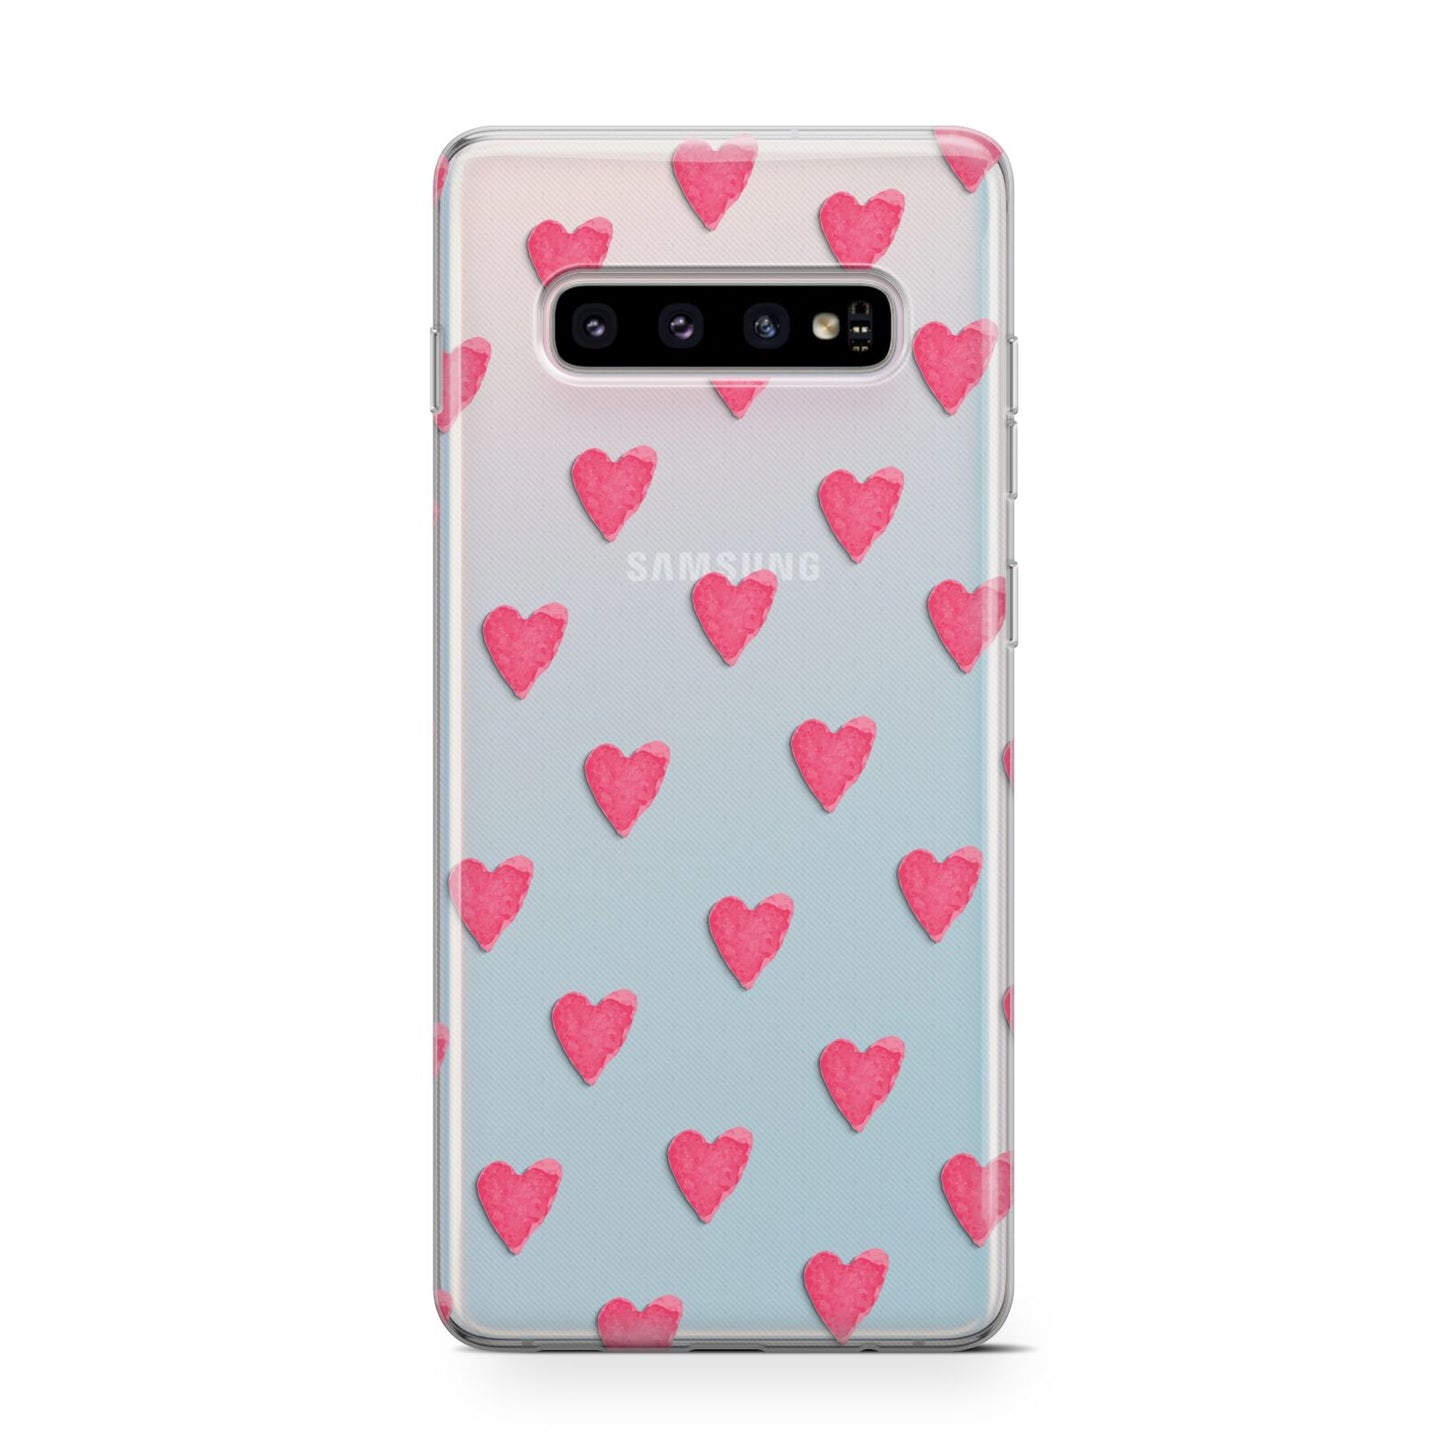 Heart Patterned Samsung Galaxy S10 Case